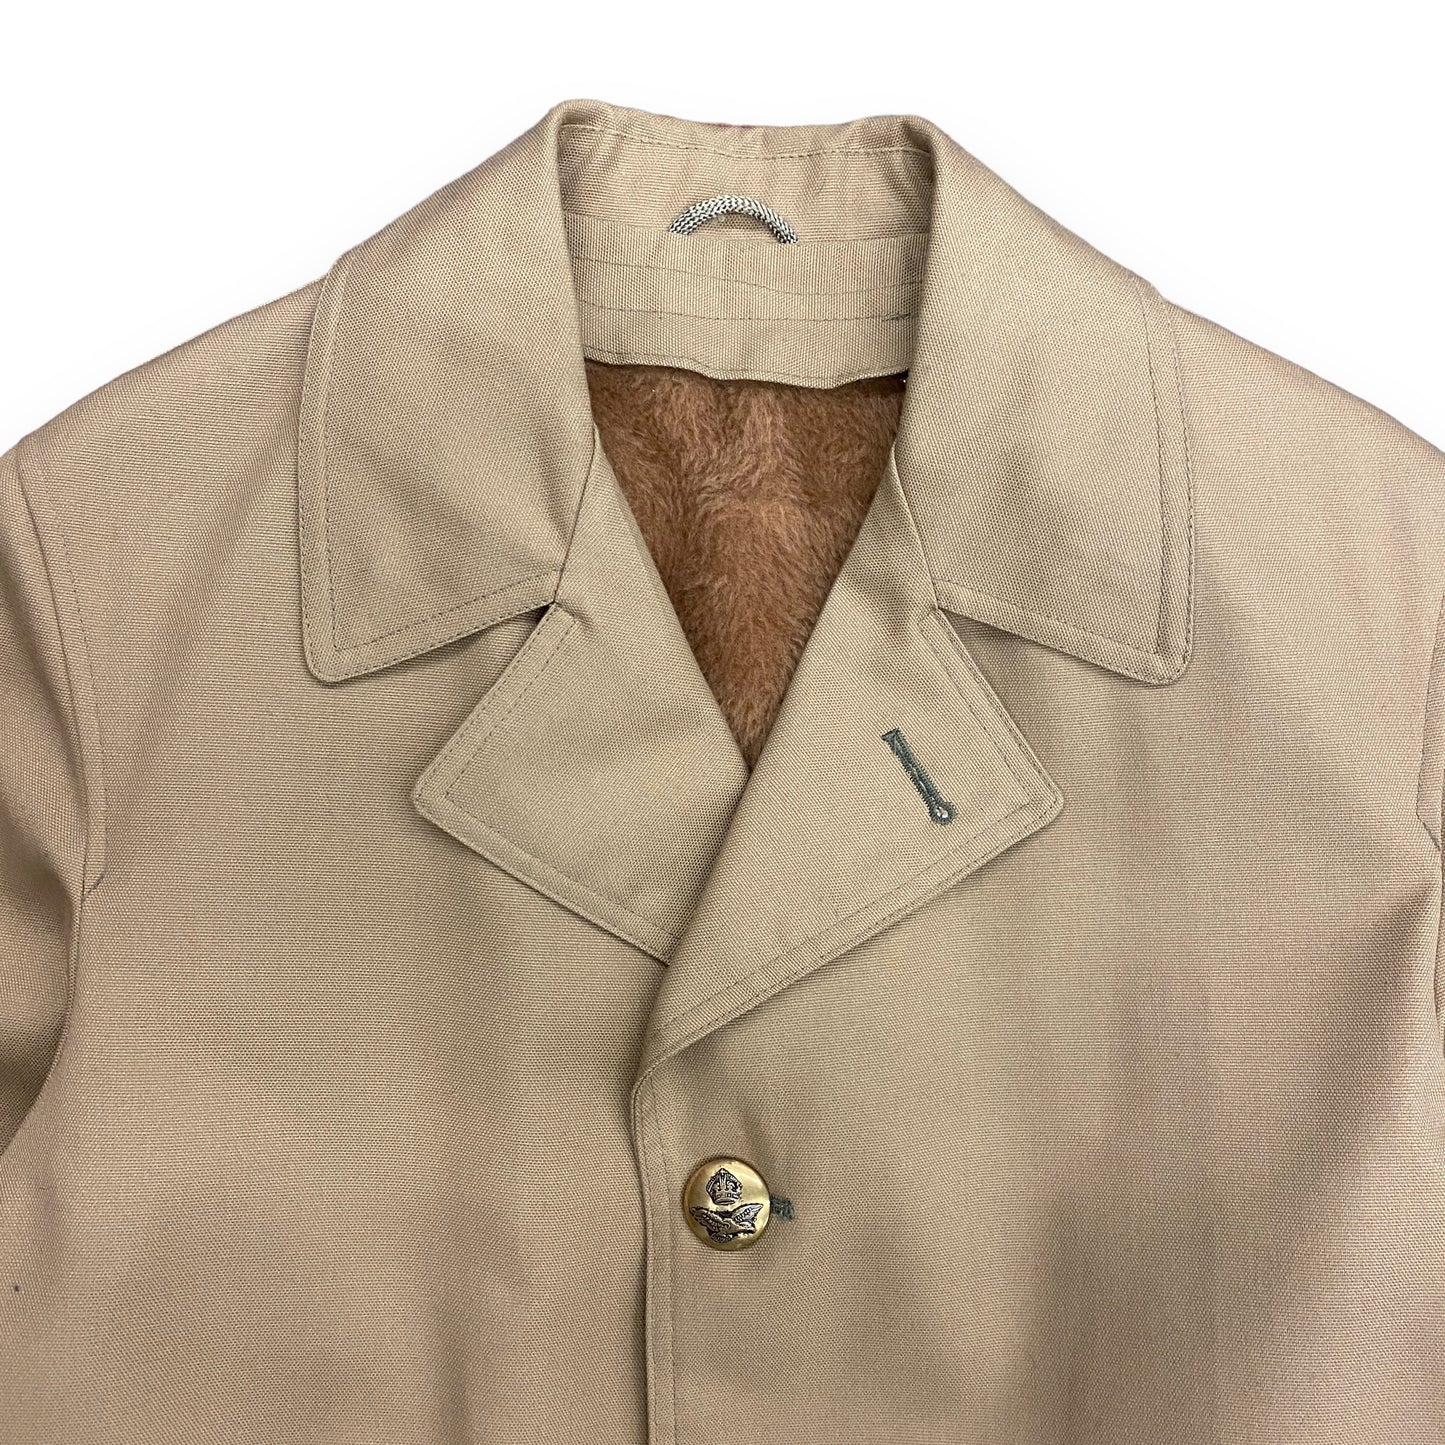 Vintage 70s Wing Flite Norseman Cloth Lined Tan Jacket - Size 38S